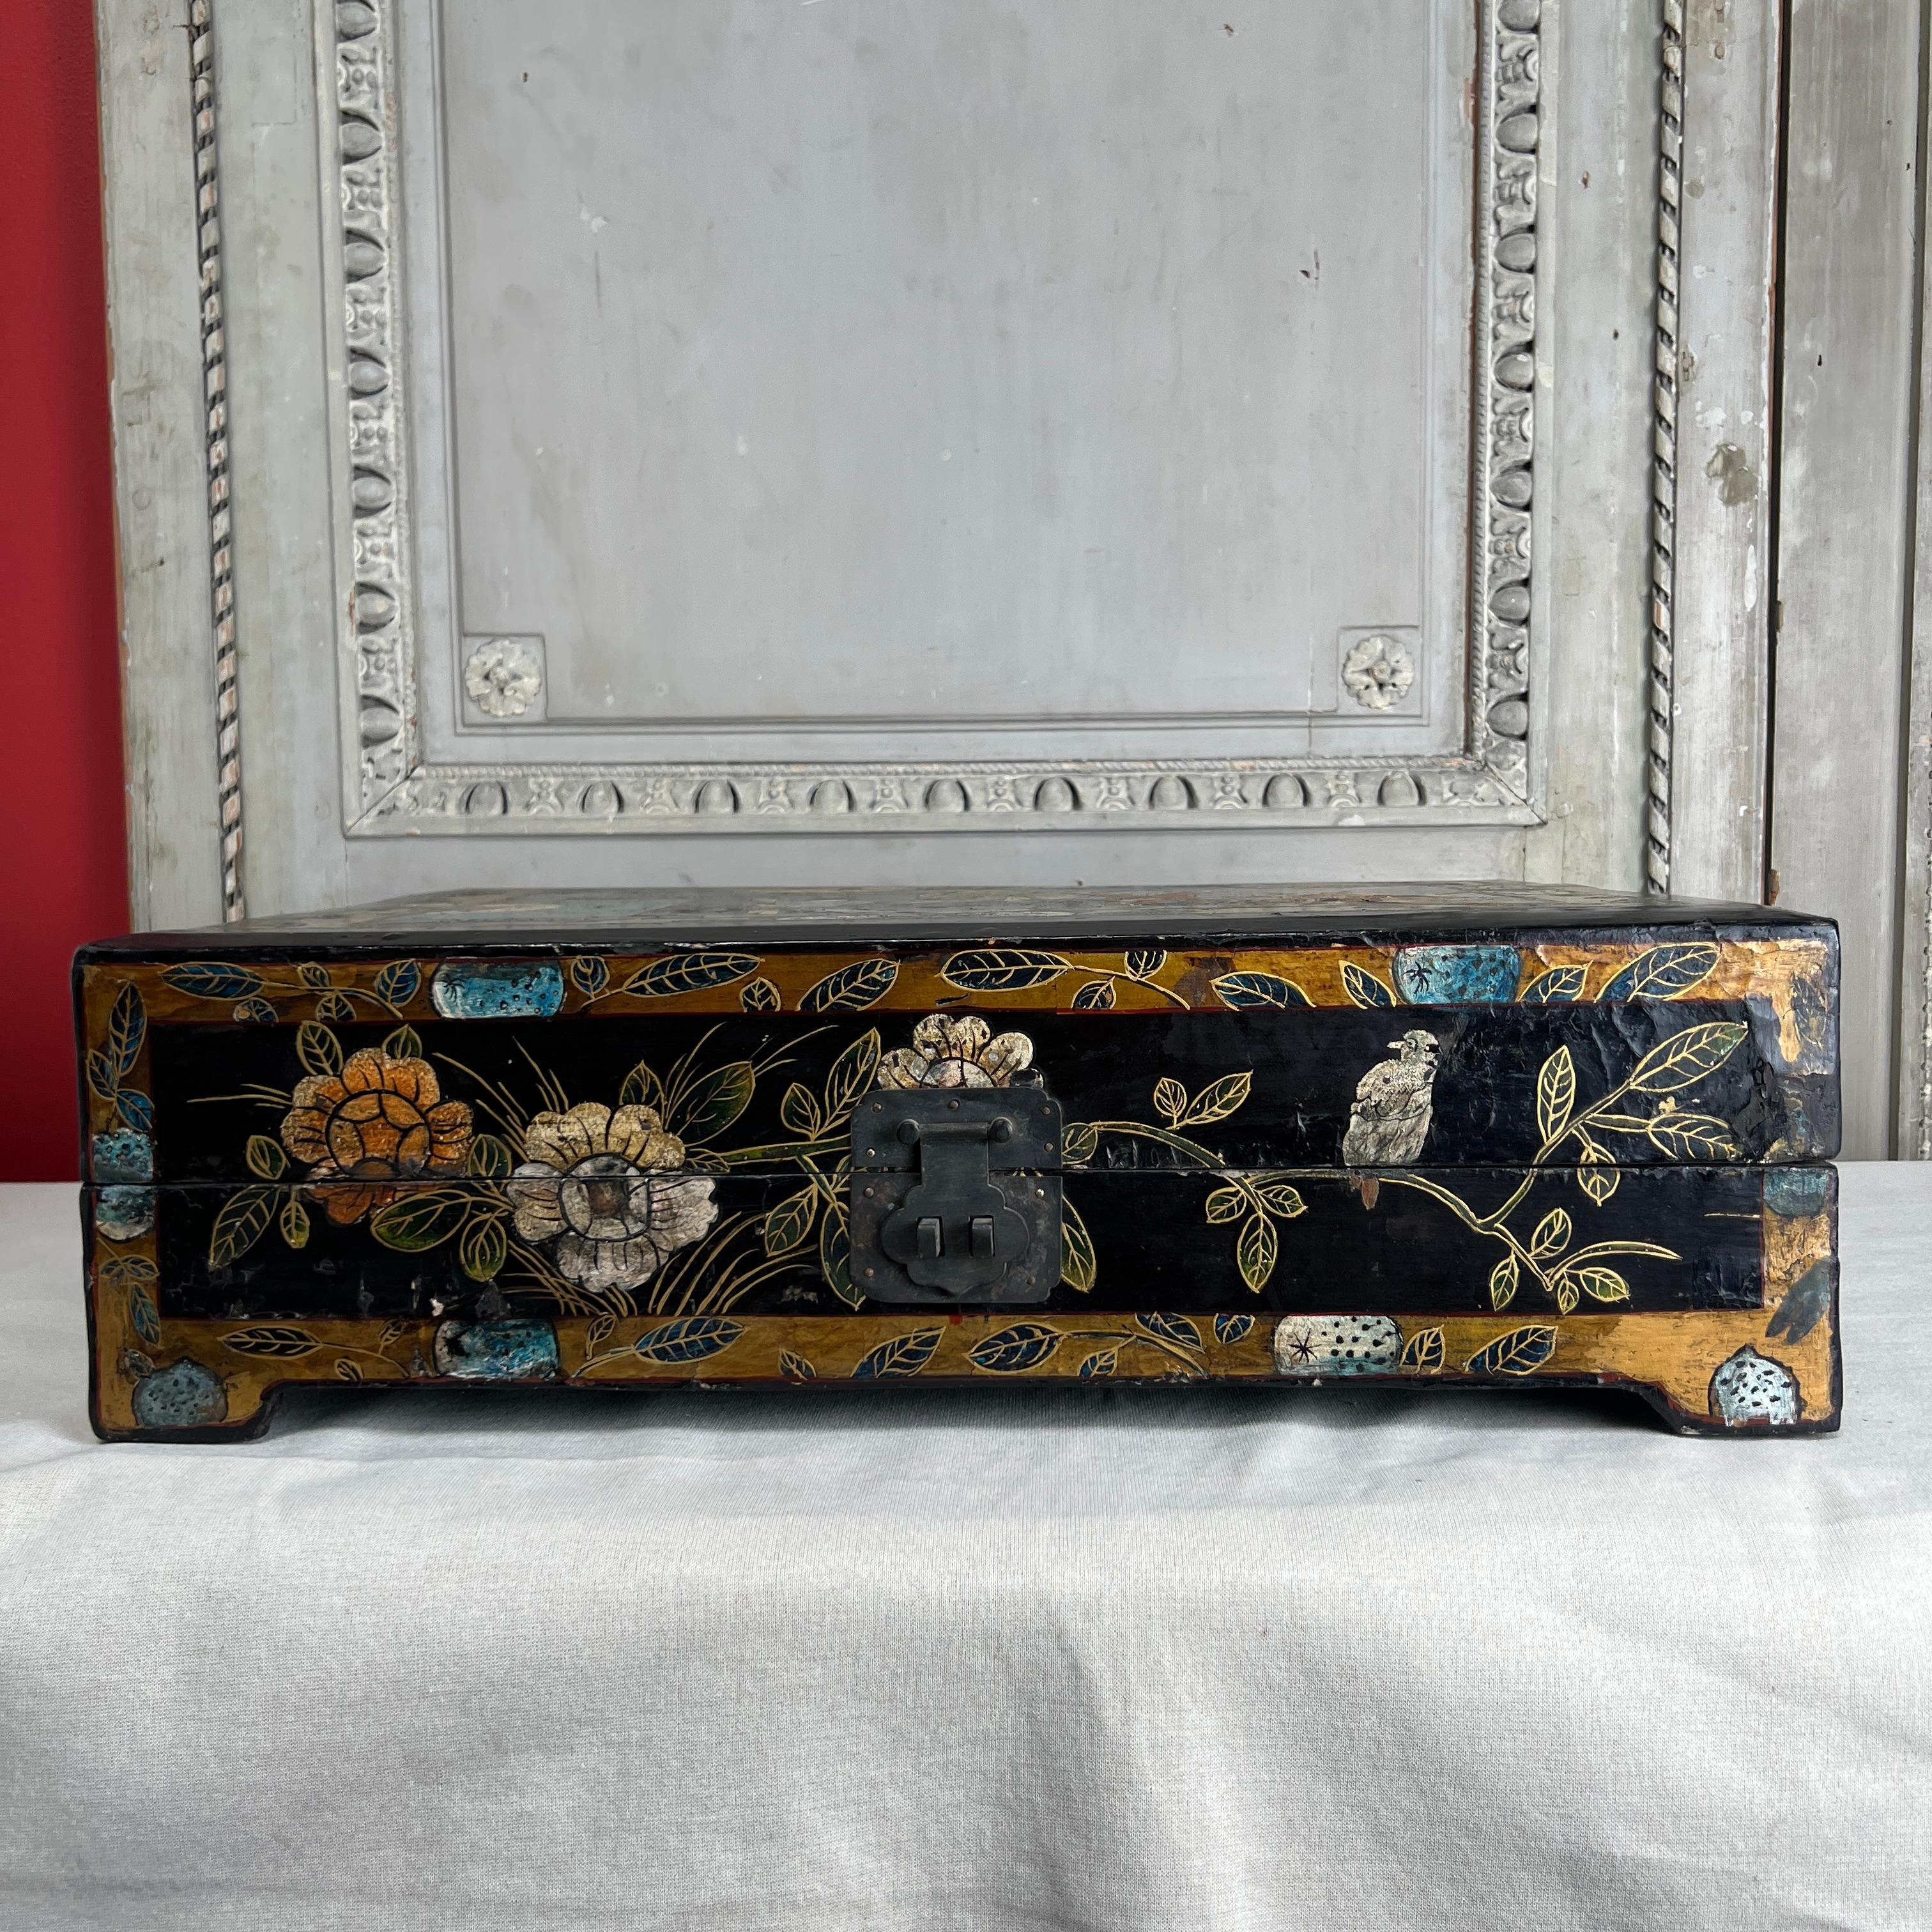 Chinoiserie Early 20th Century Chinese Black and Gold Lacquered Box